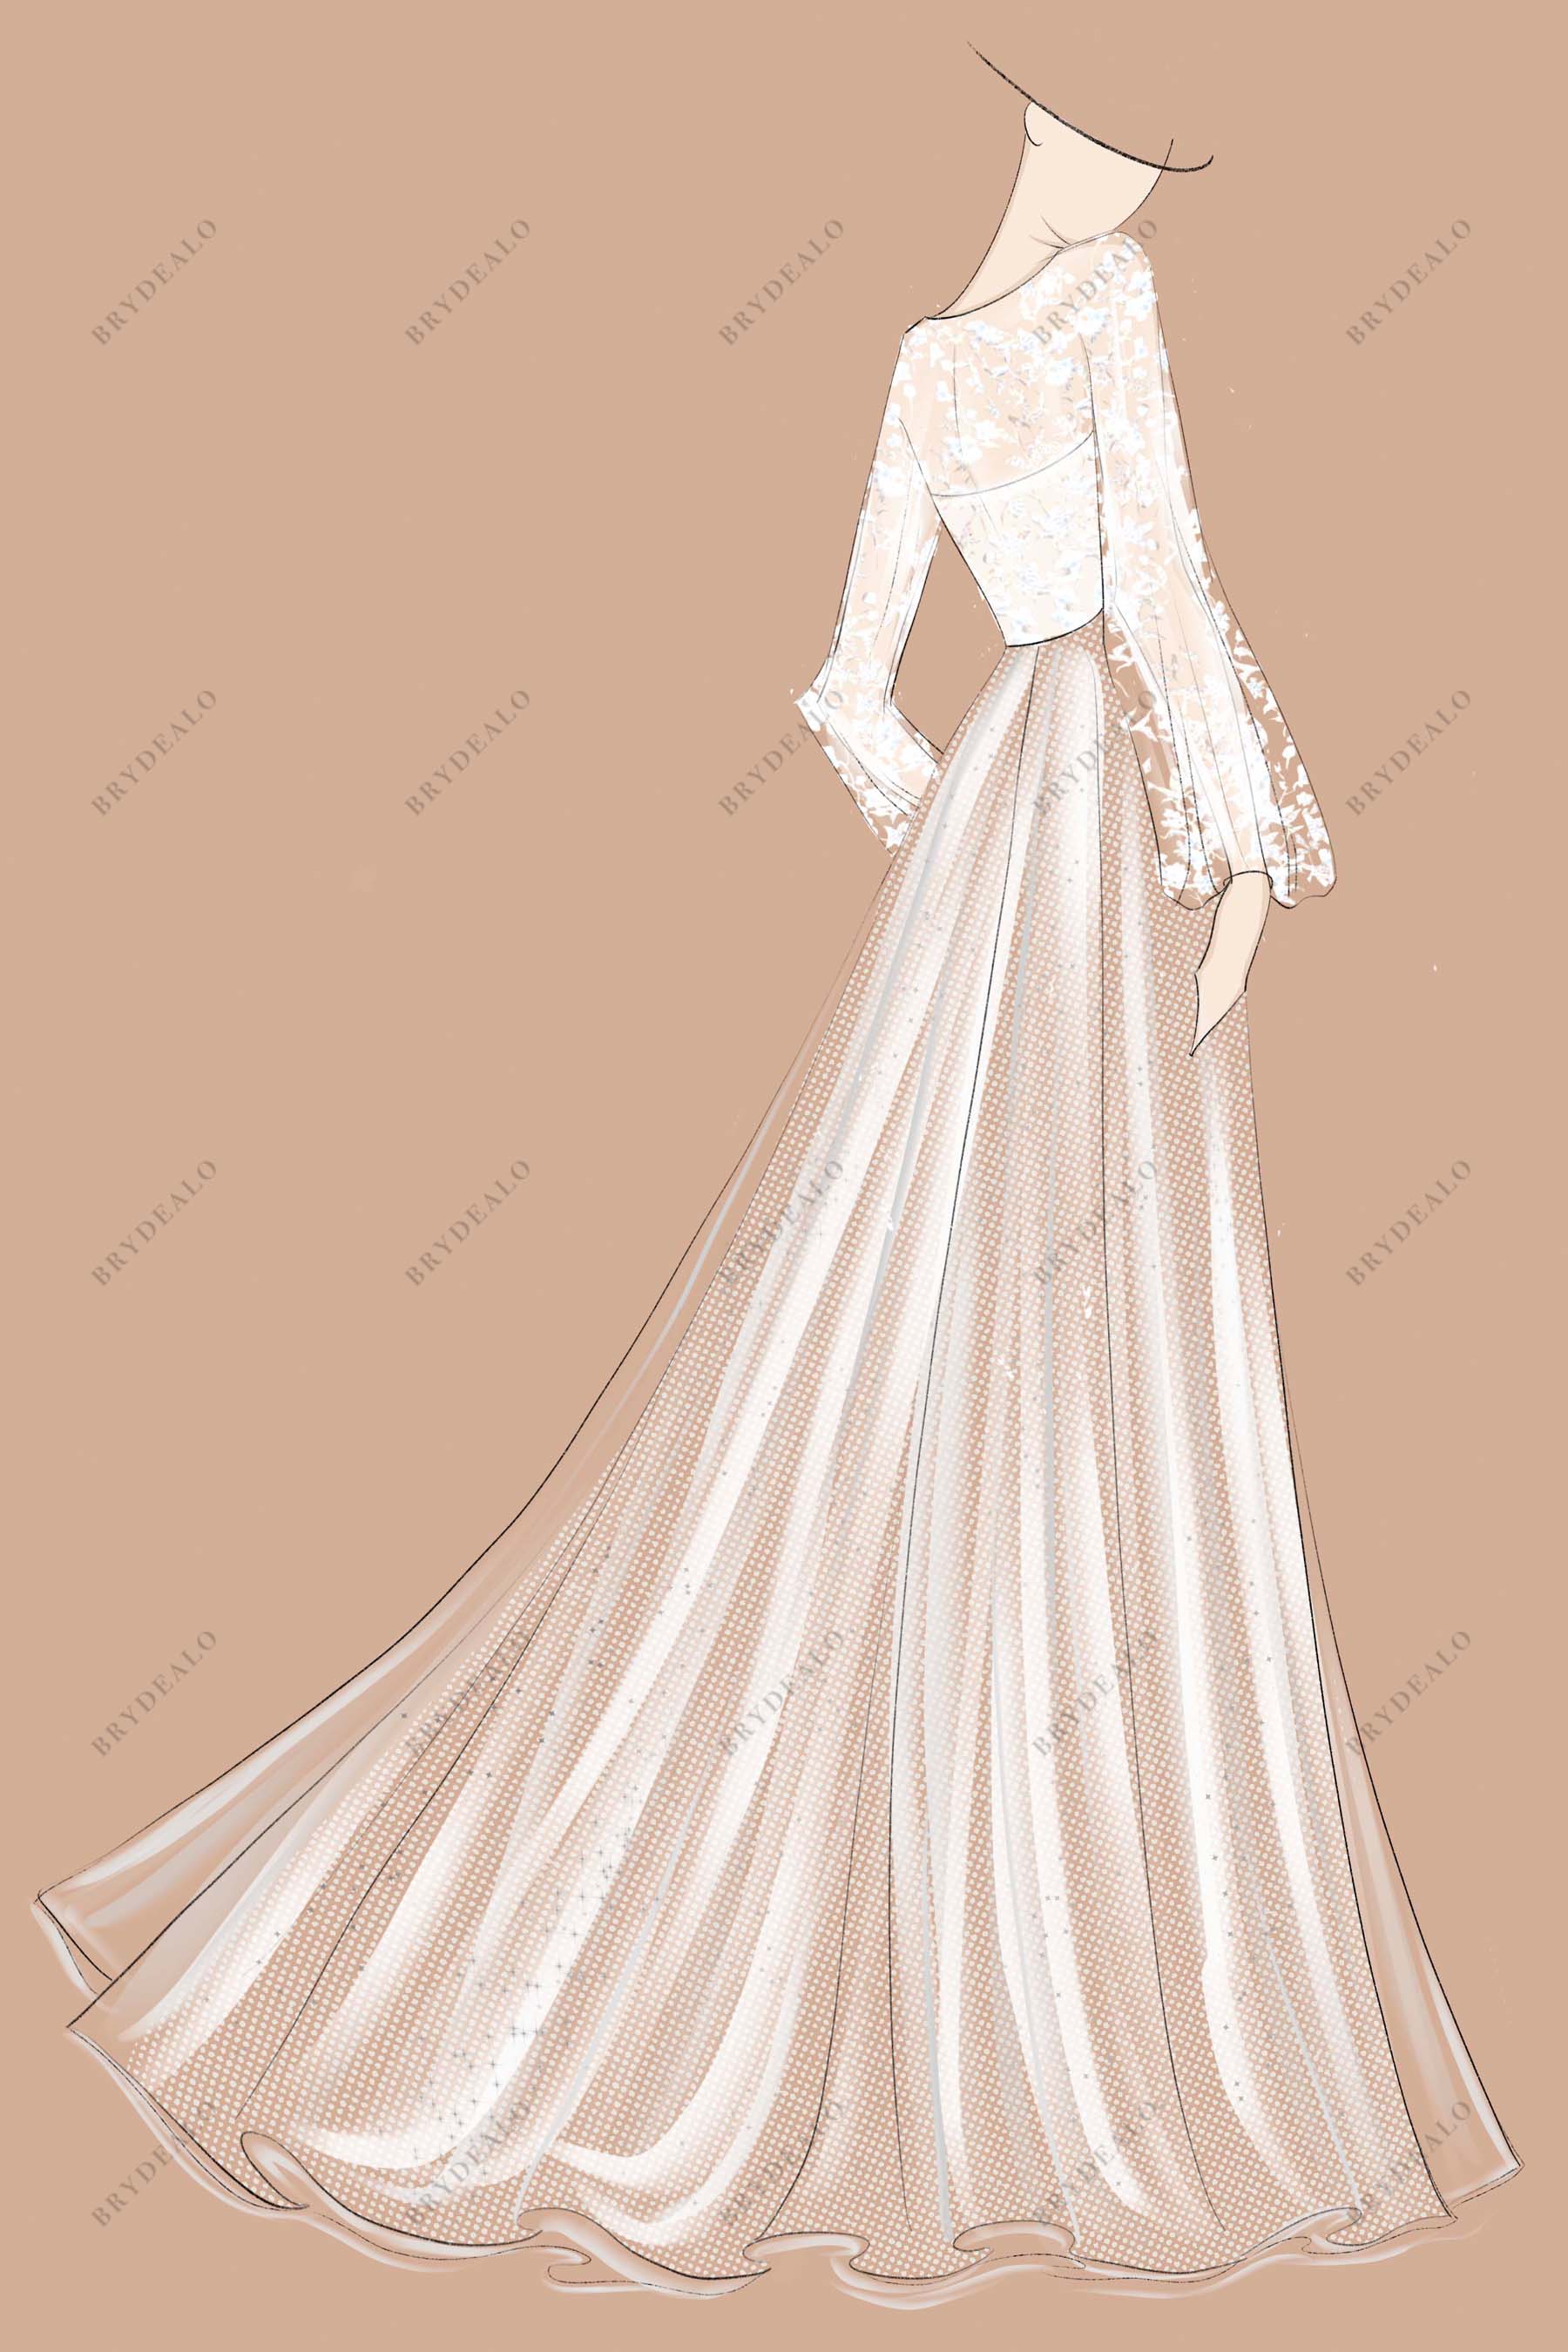 Lace Puffy Sleeves A-line Bridal Dress Sketch